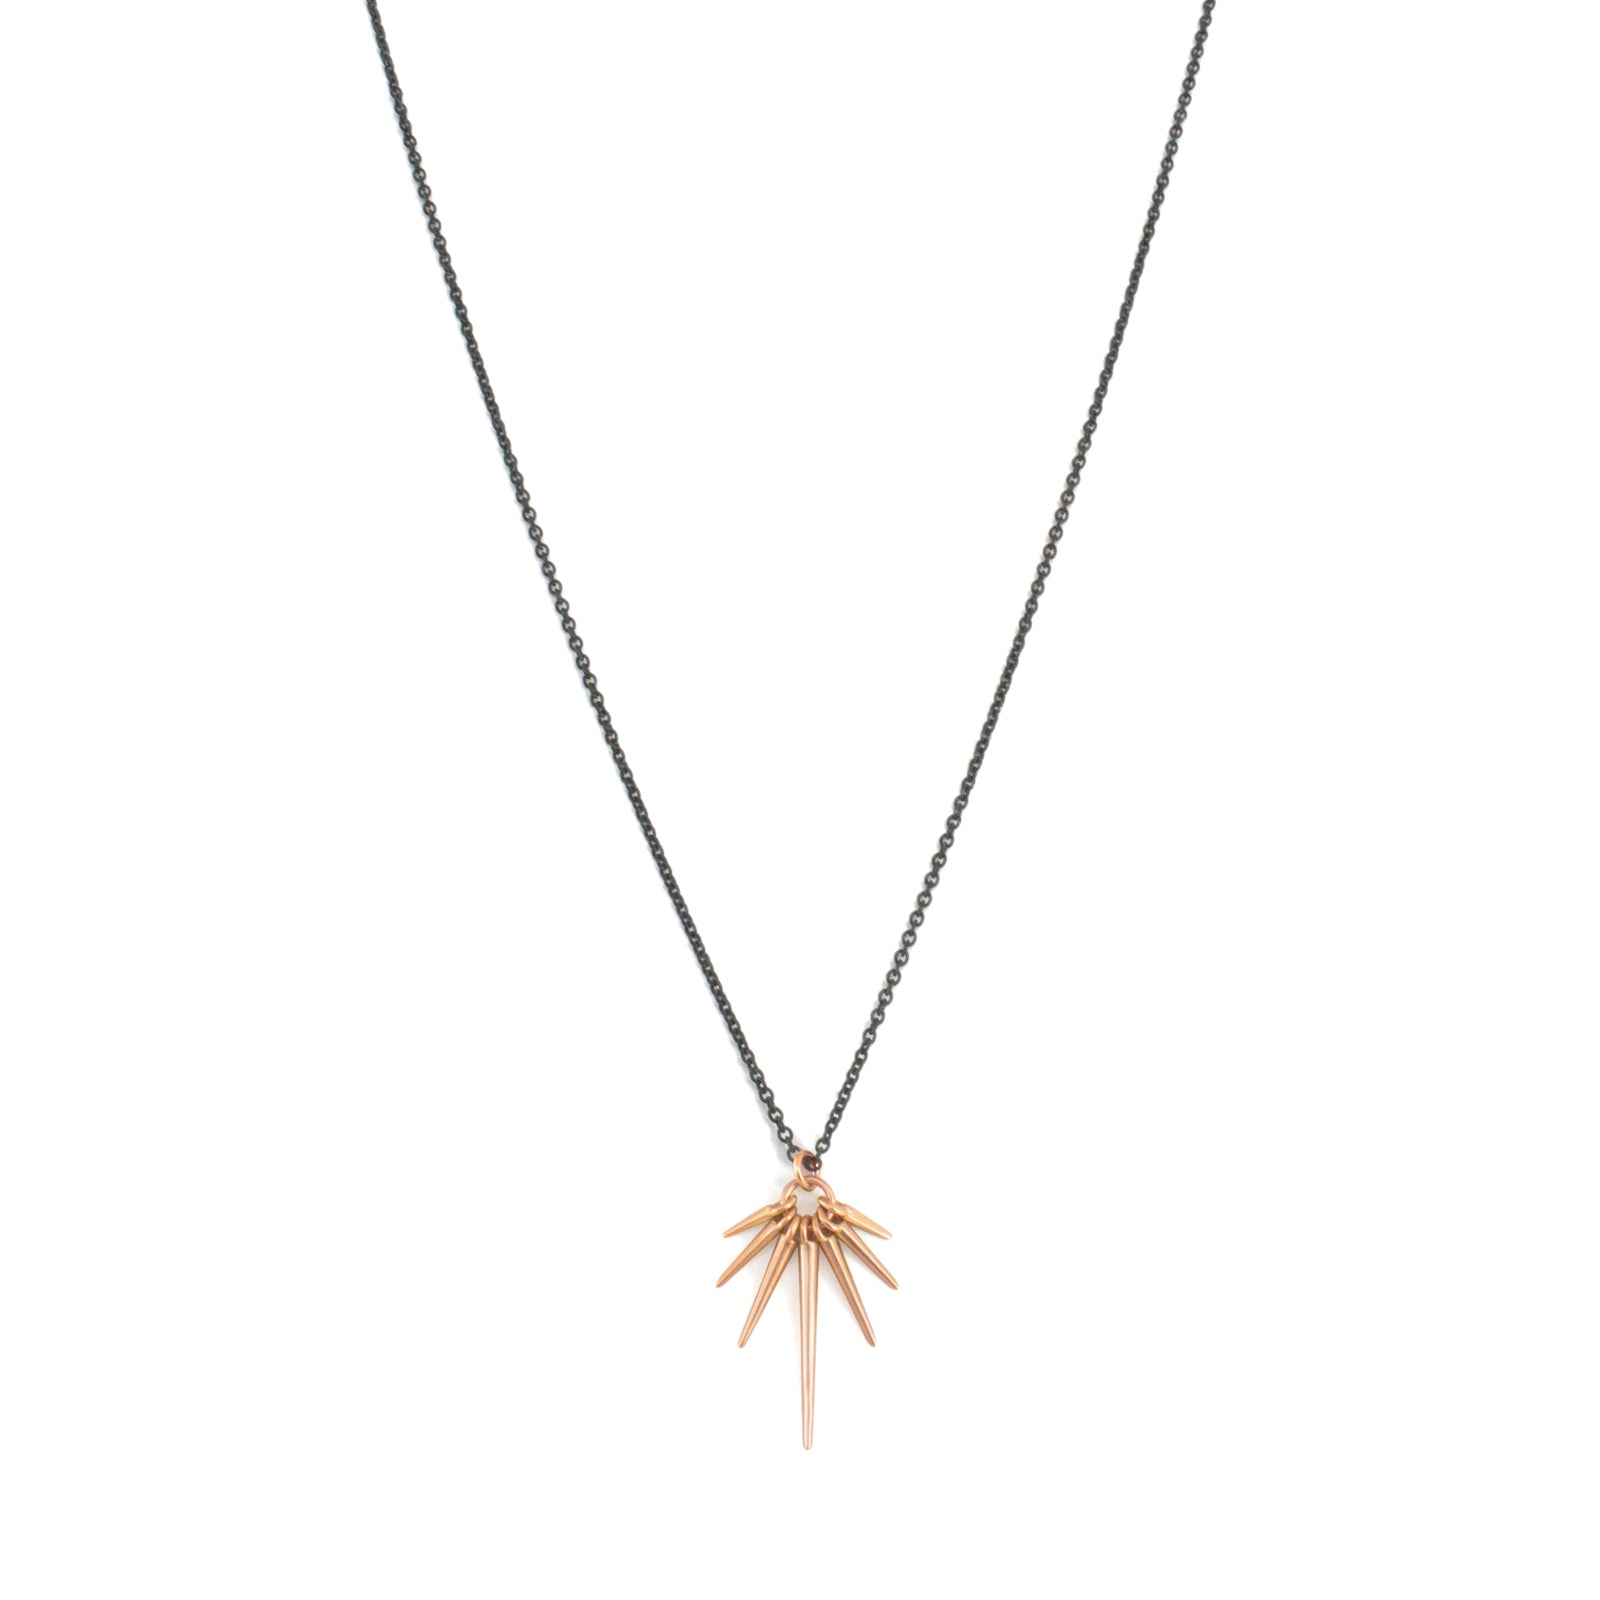 18k yellow gold/oxidized silver chain / medium fan points necklace